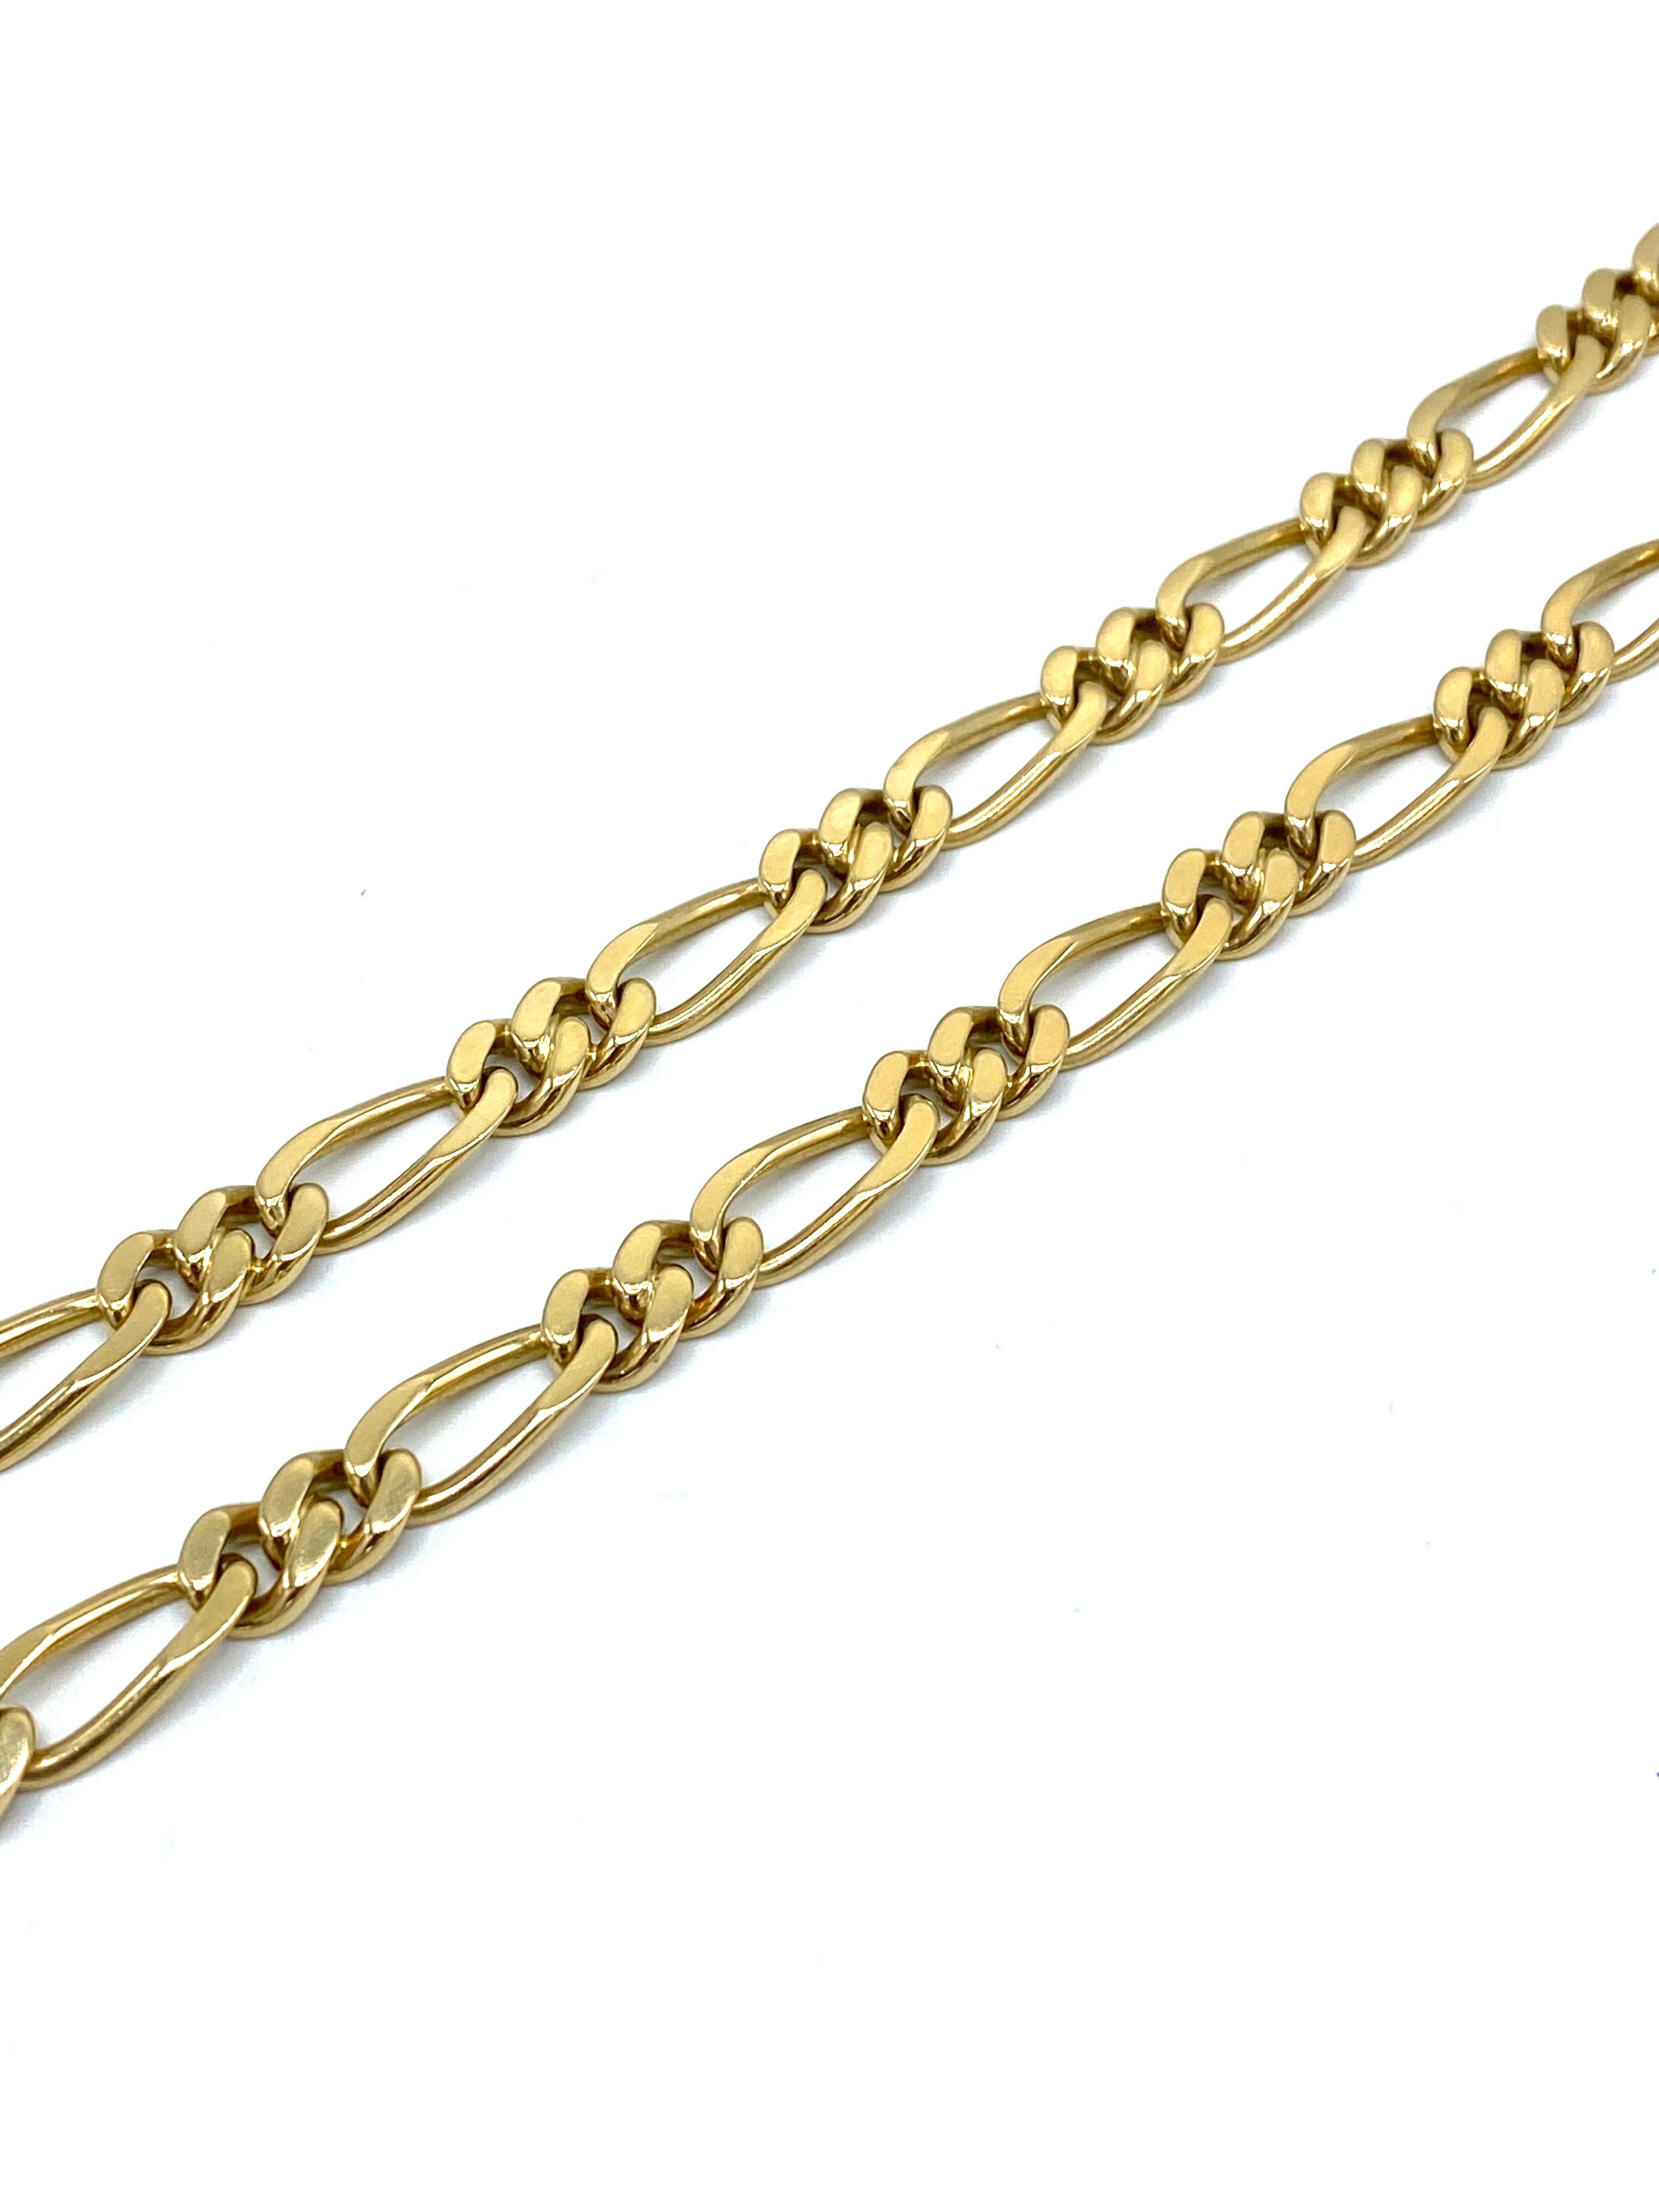 Vintage Van Cleef and Arpels Yellow Gold Link Chain Necklace 1